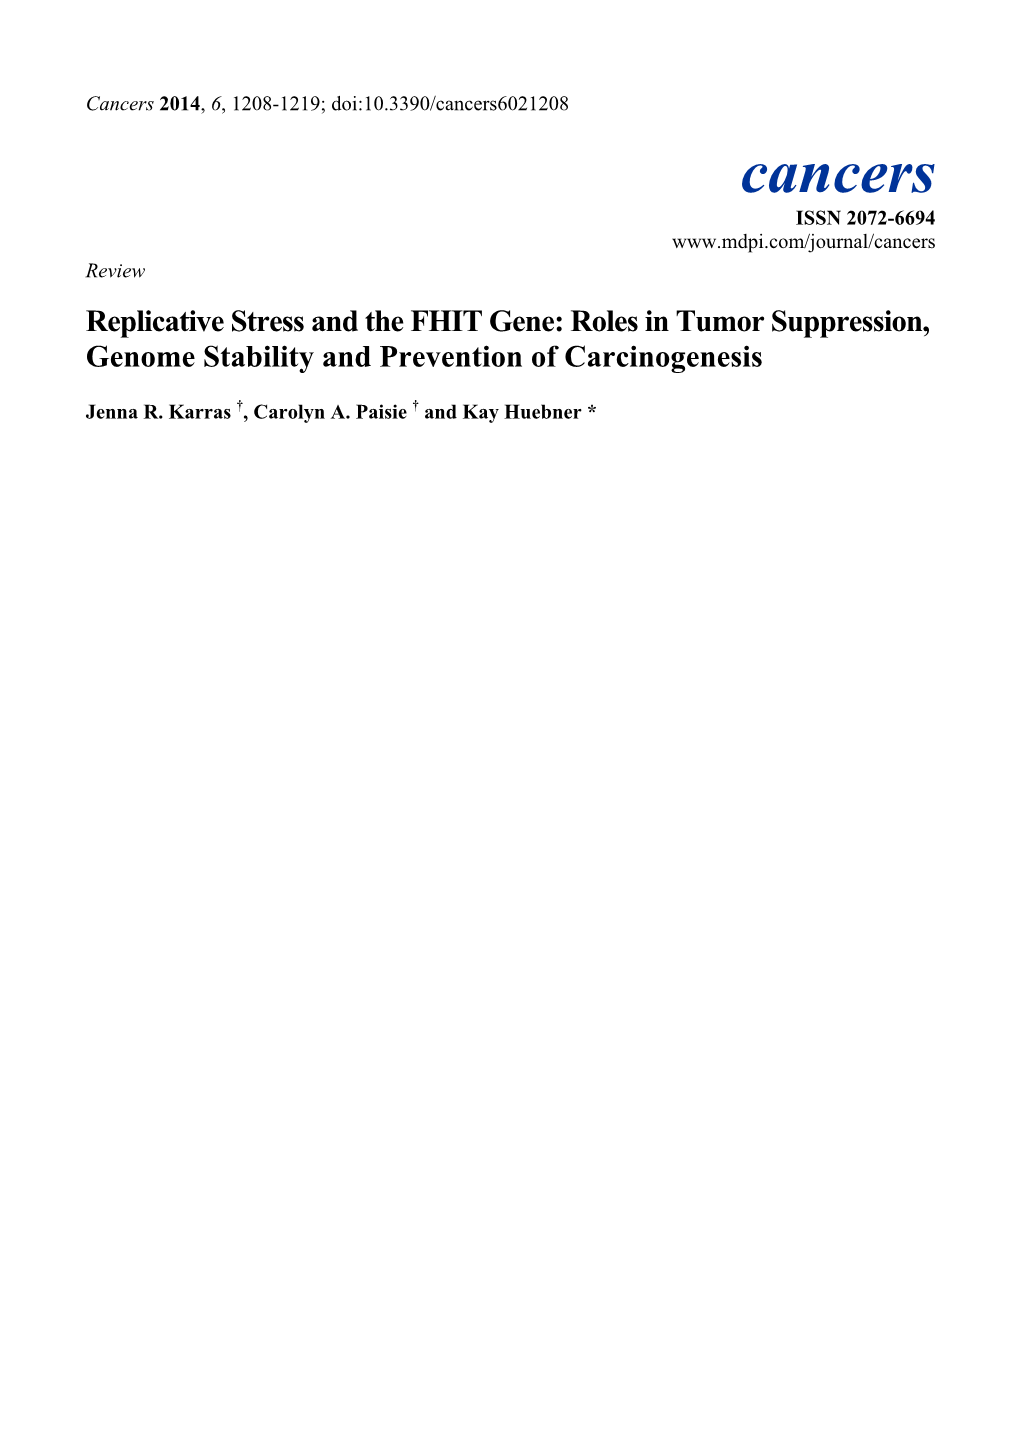 Replicative Stress and the FHIT Gene: Roles in Tumor Suppression, Genome Stability and Prevention of Carcinogenesis